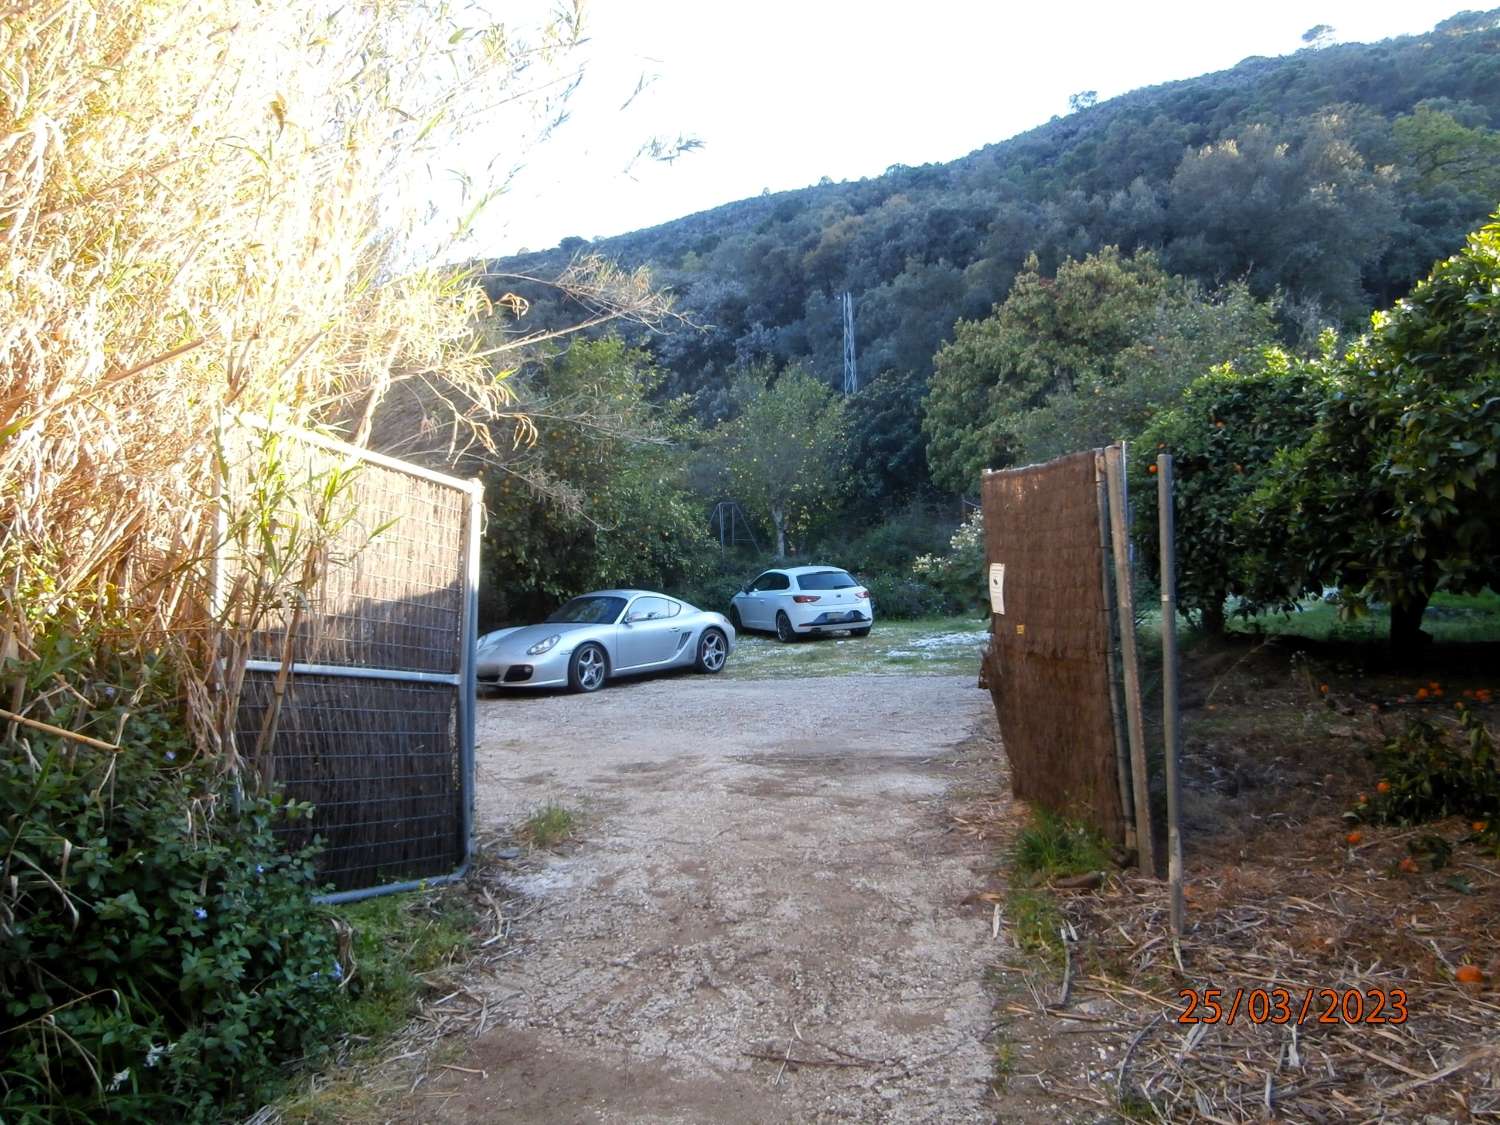 REDUCED PRICE, Great country house for sale, water well, total 9,000m2 approx.